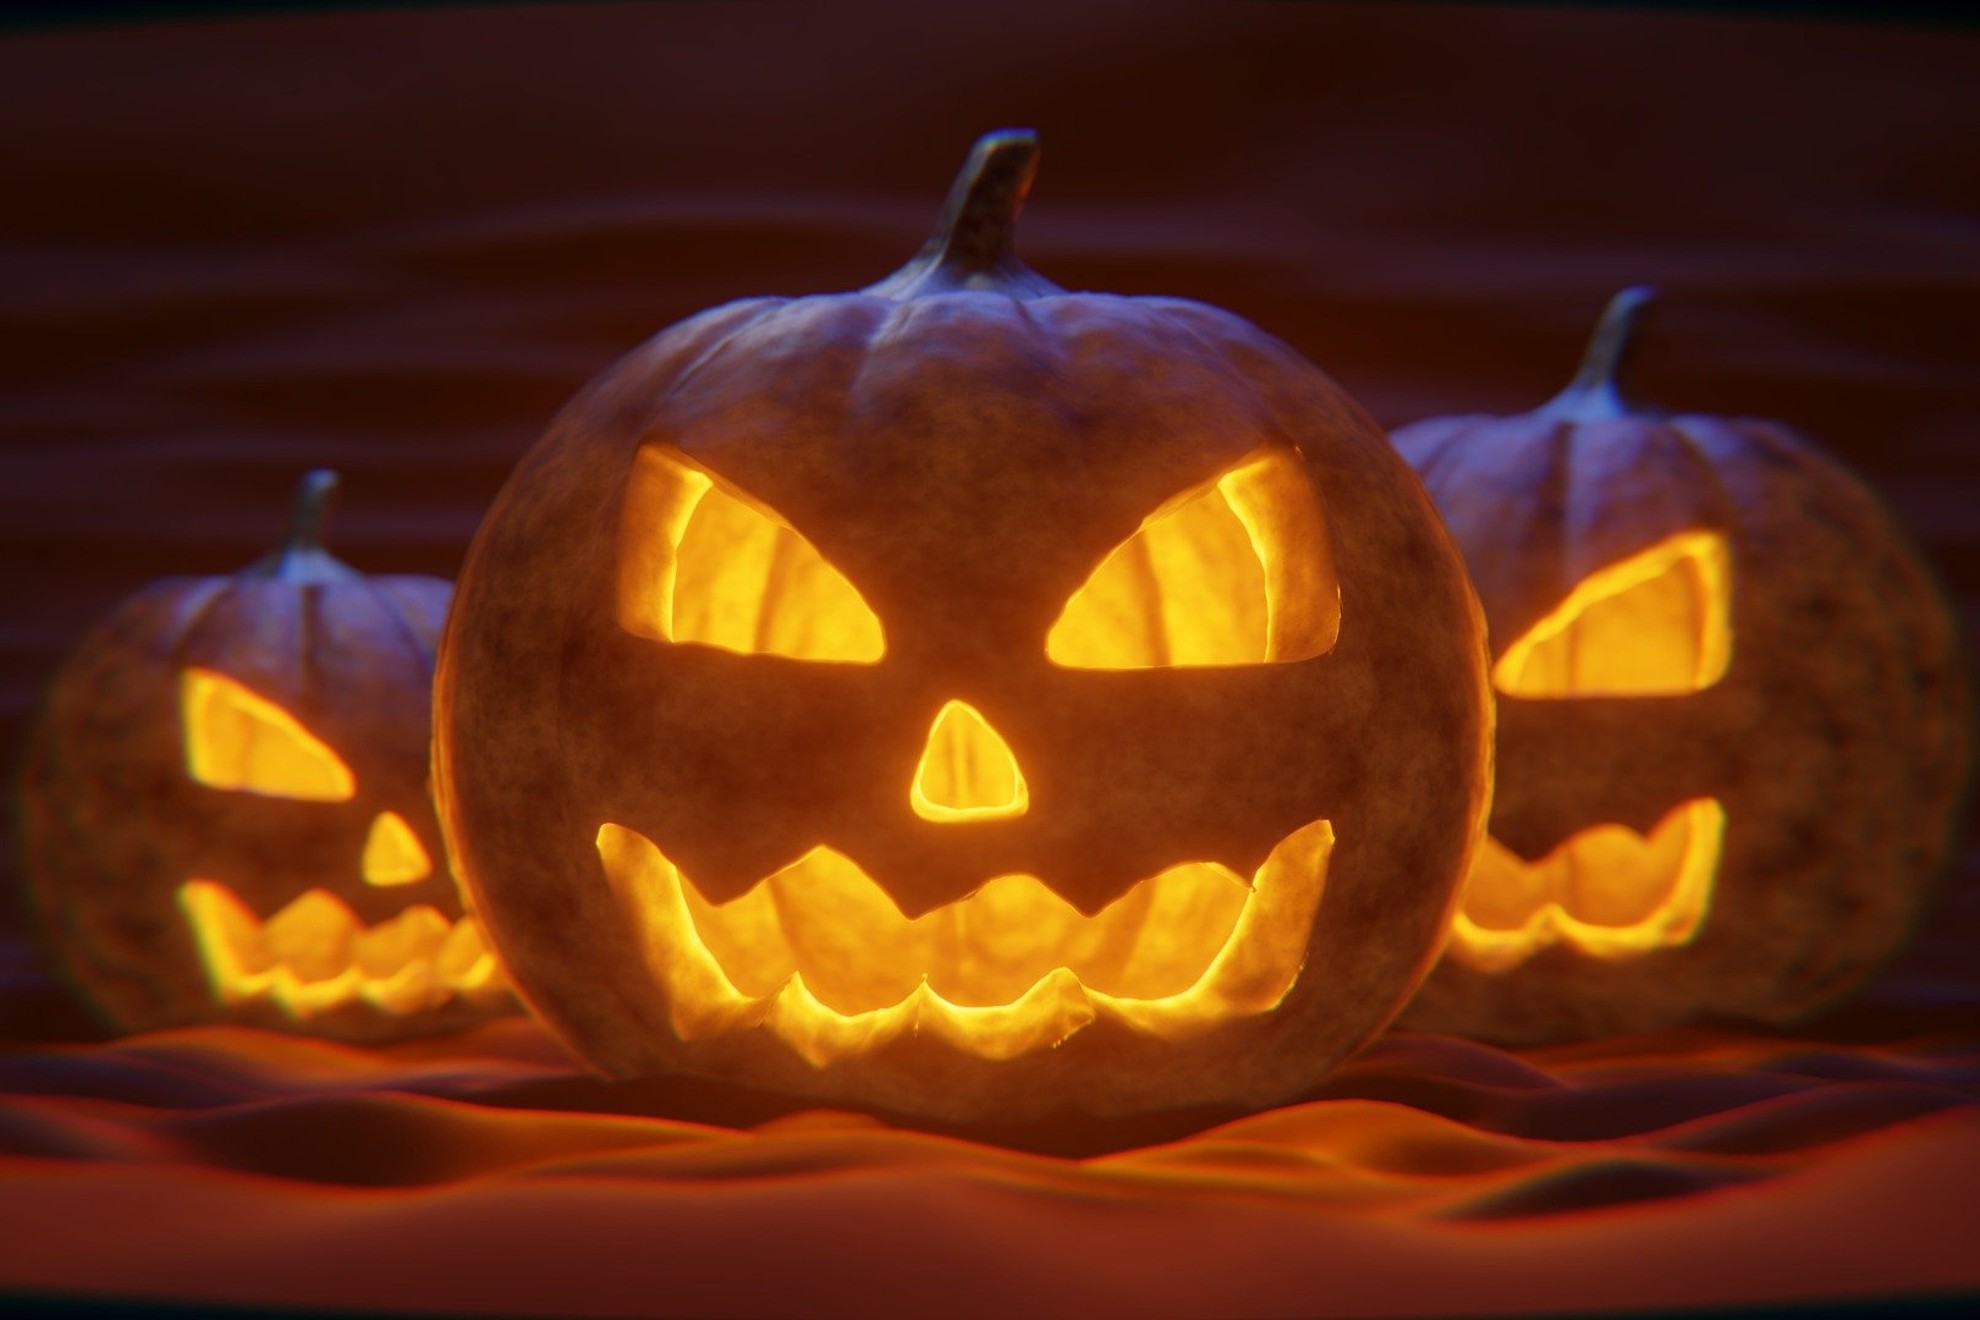 The true story of the pumpkin on Halloween: Why are pumpkins a symbol of the holiday?